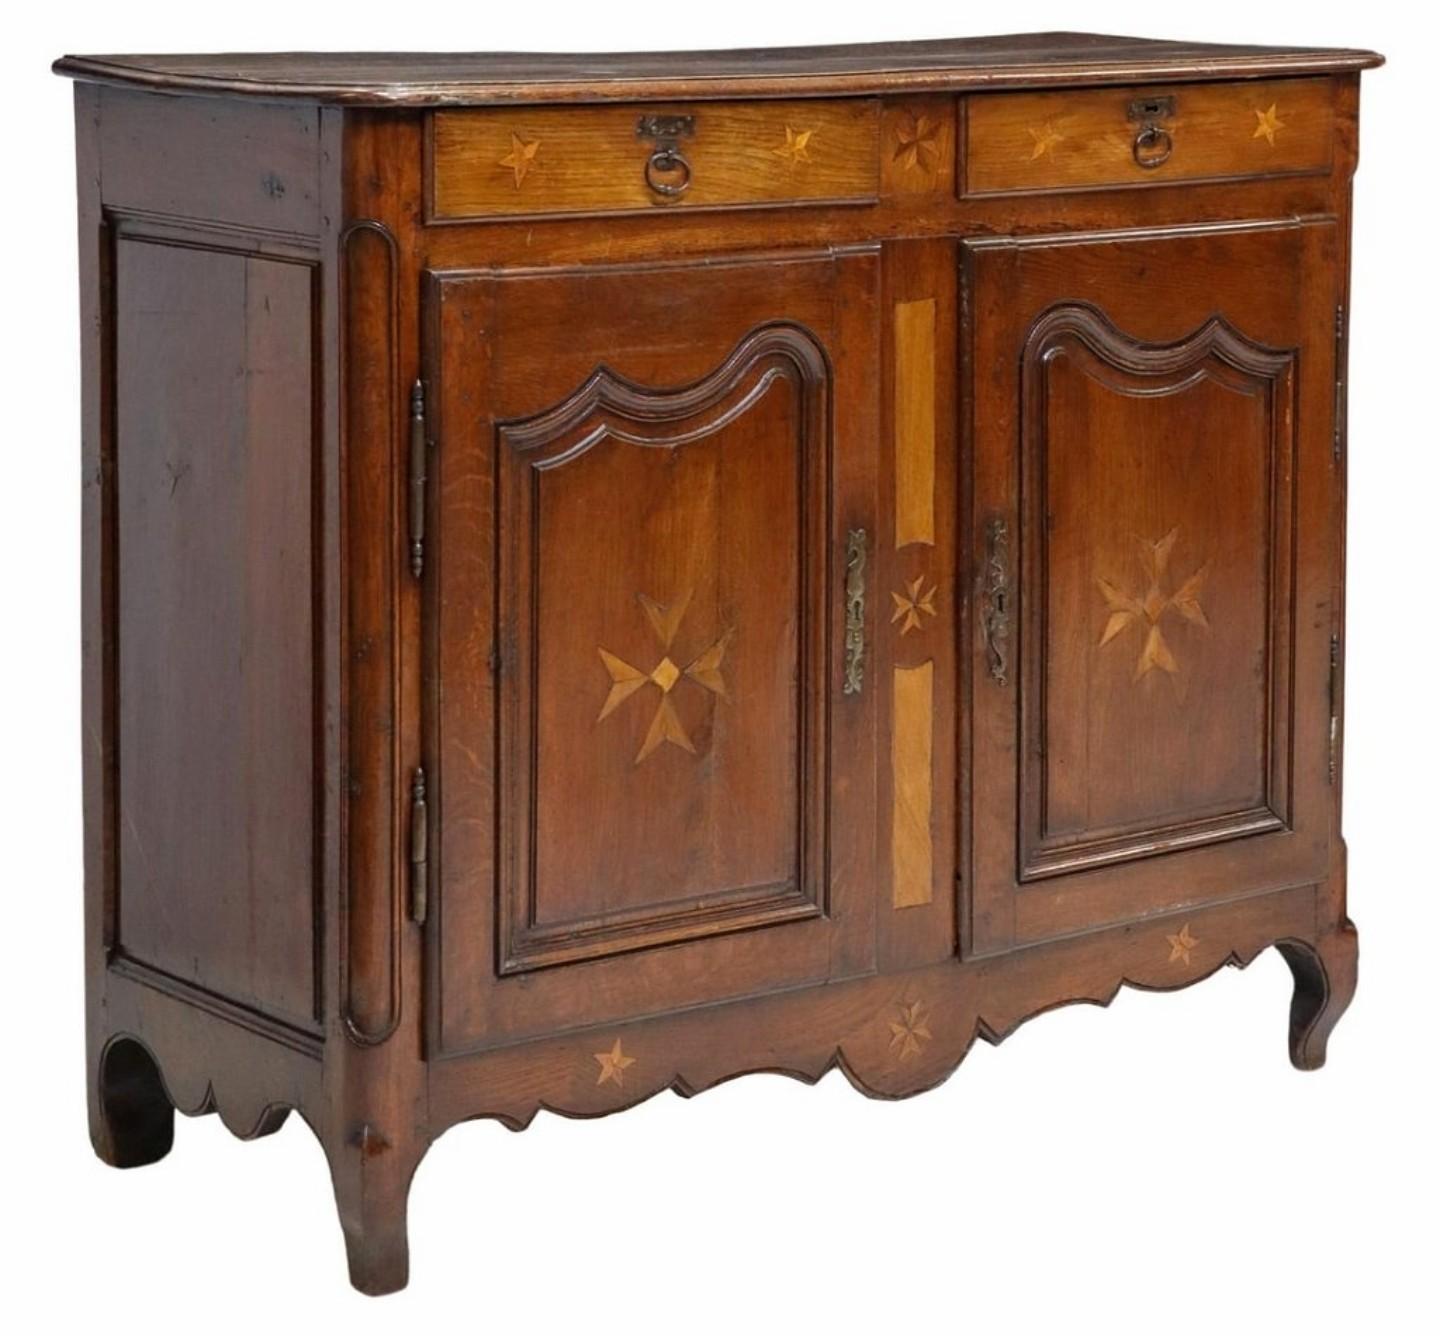 A rare and likely one-of-a-kind rustic country French oak and marquetry enfilade buffet. circa 1775-1825

Born in Provincial France in the late 18th / early 19th century, hand-crafted in elegant Louis XV taste, having a wooden planked top with